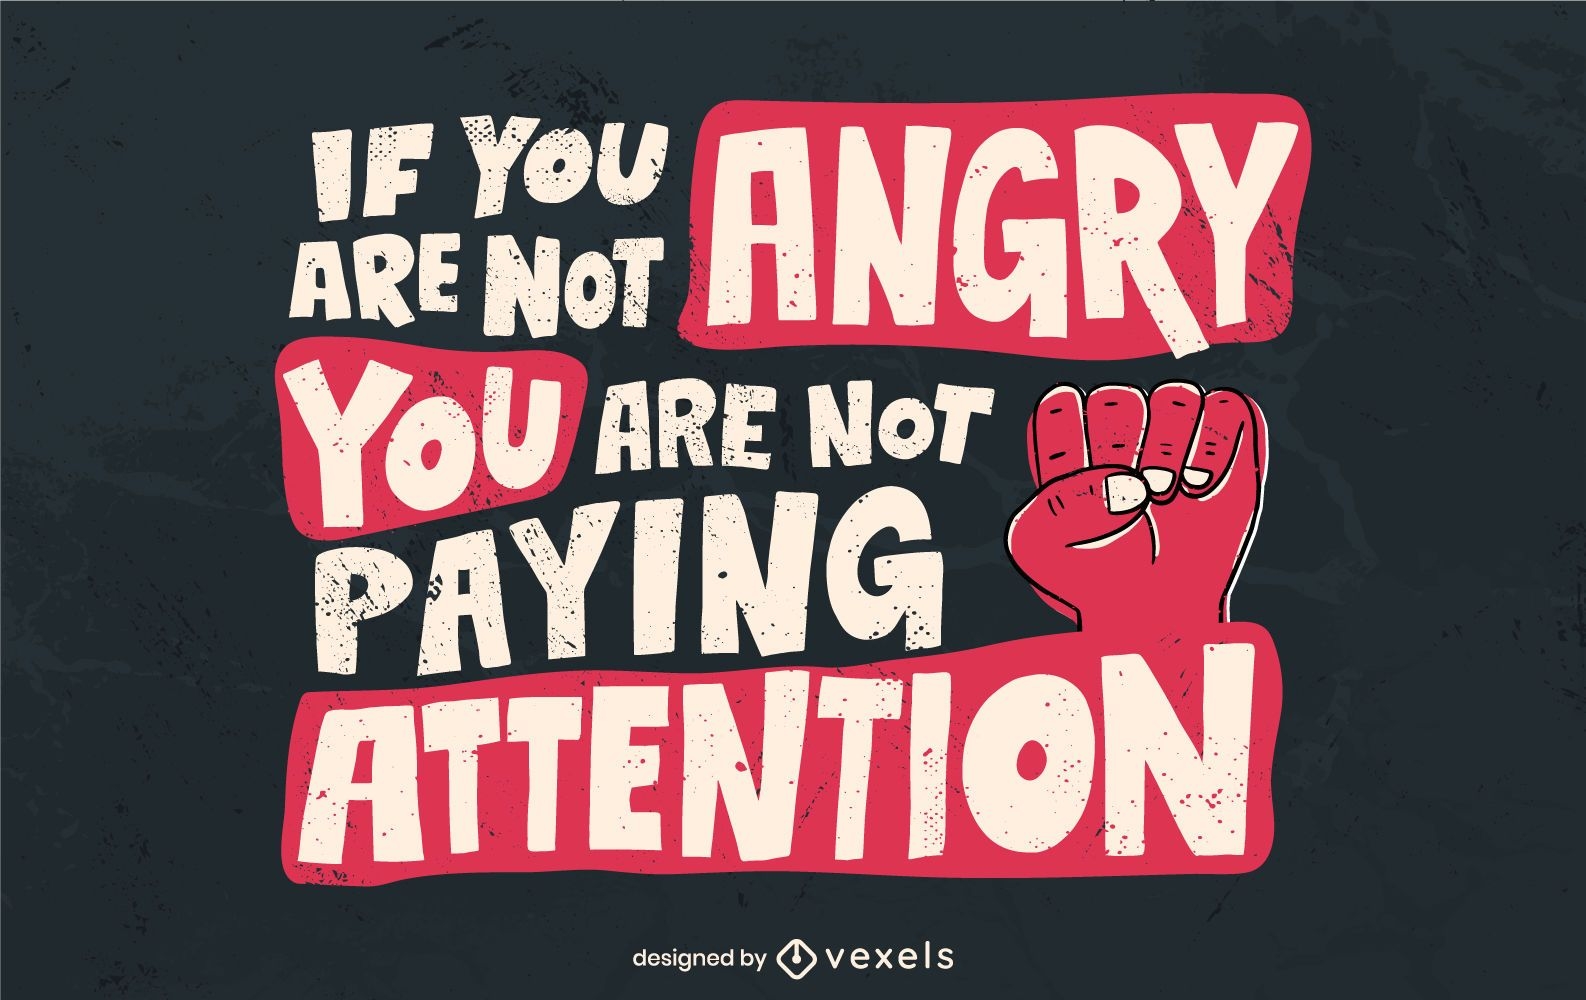 If you are not angry lettering design